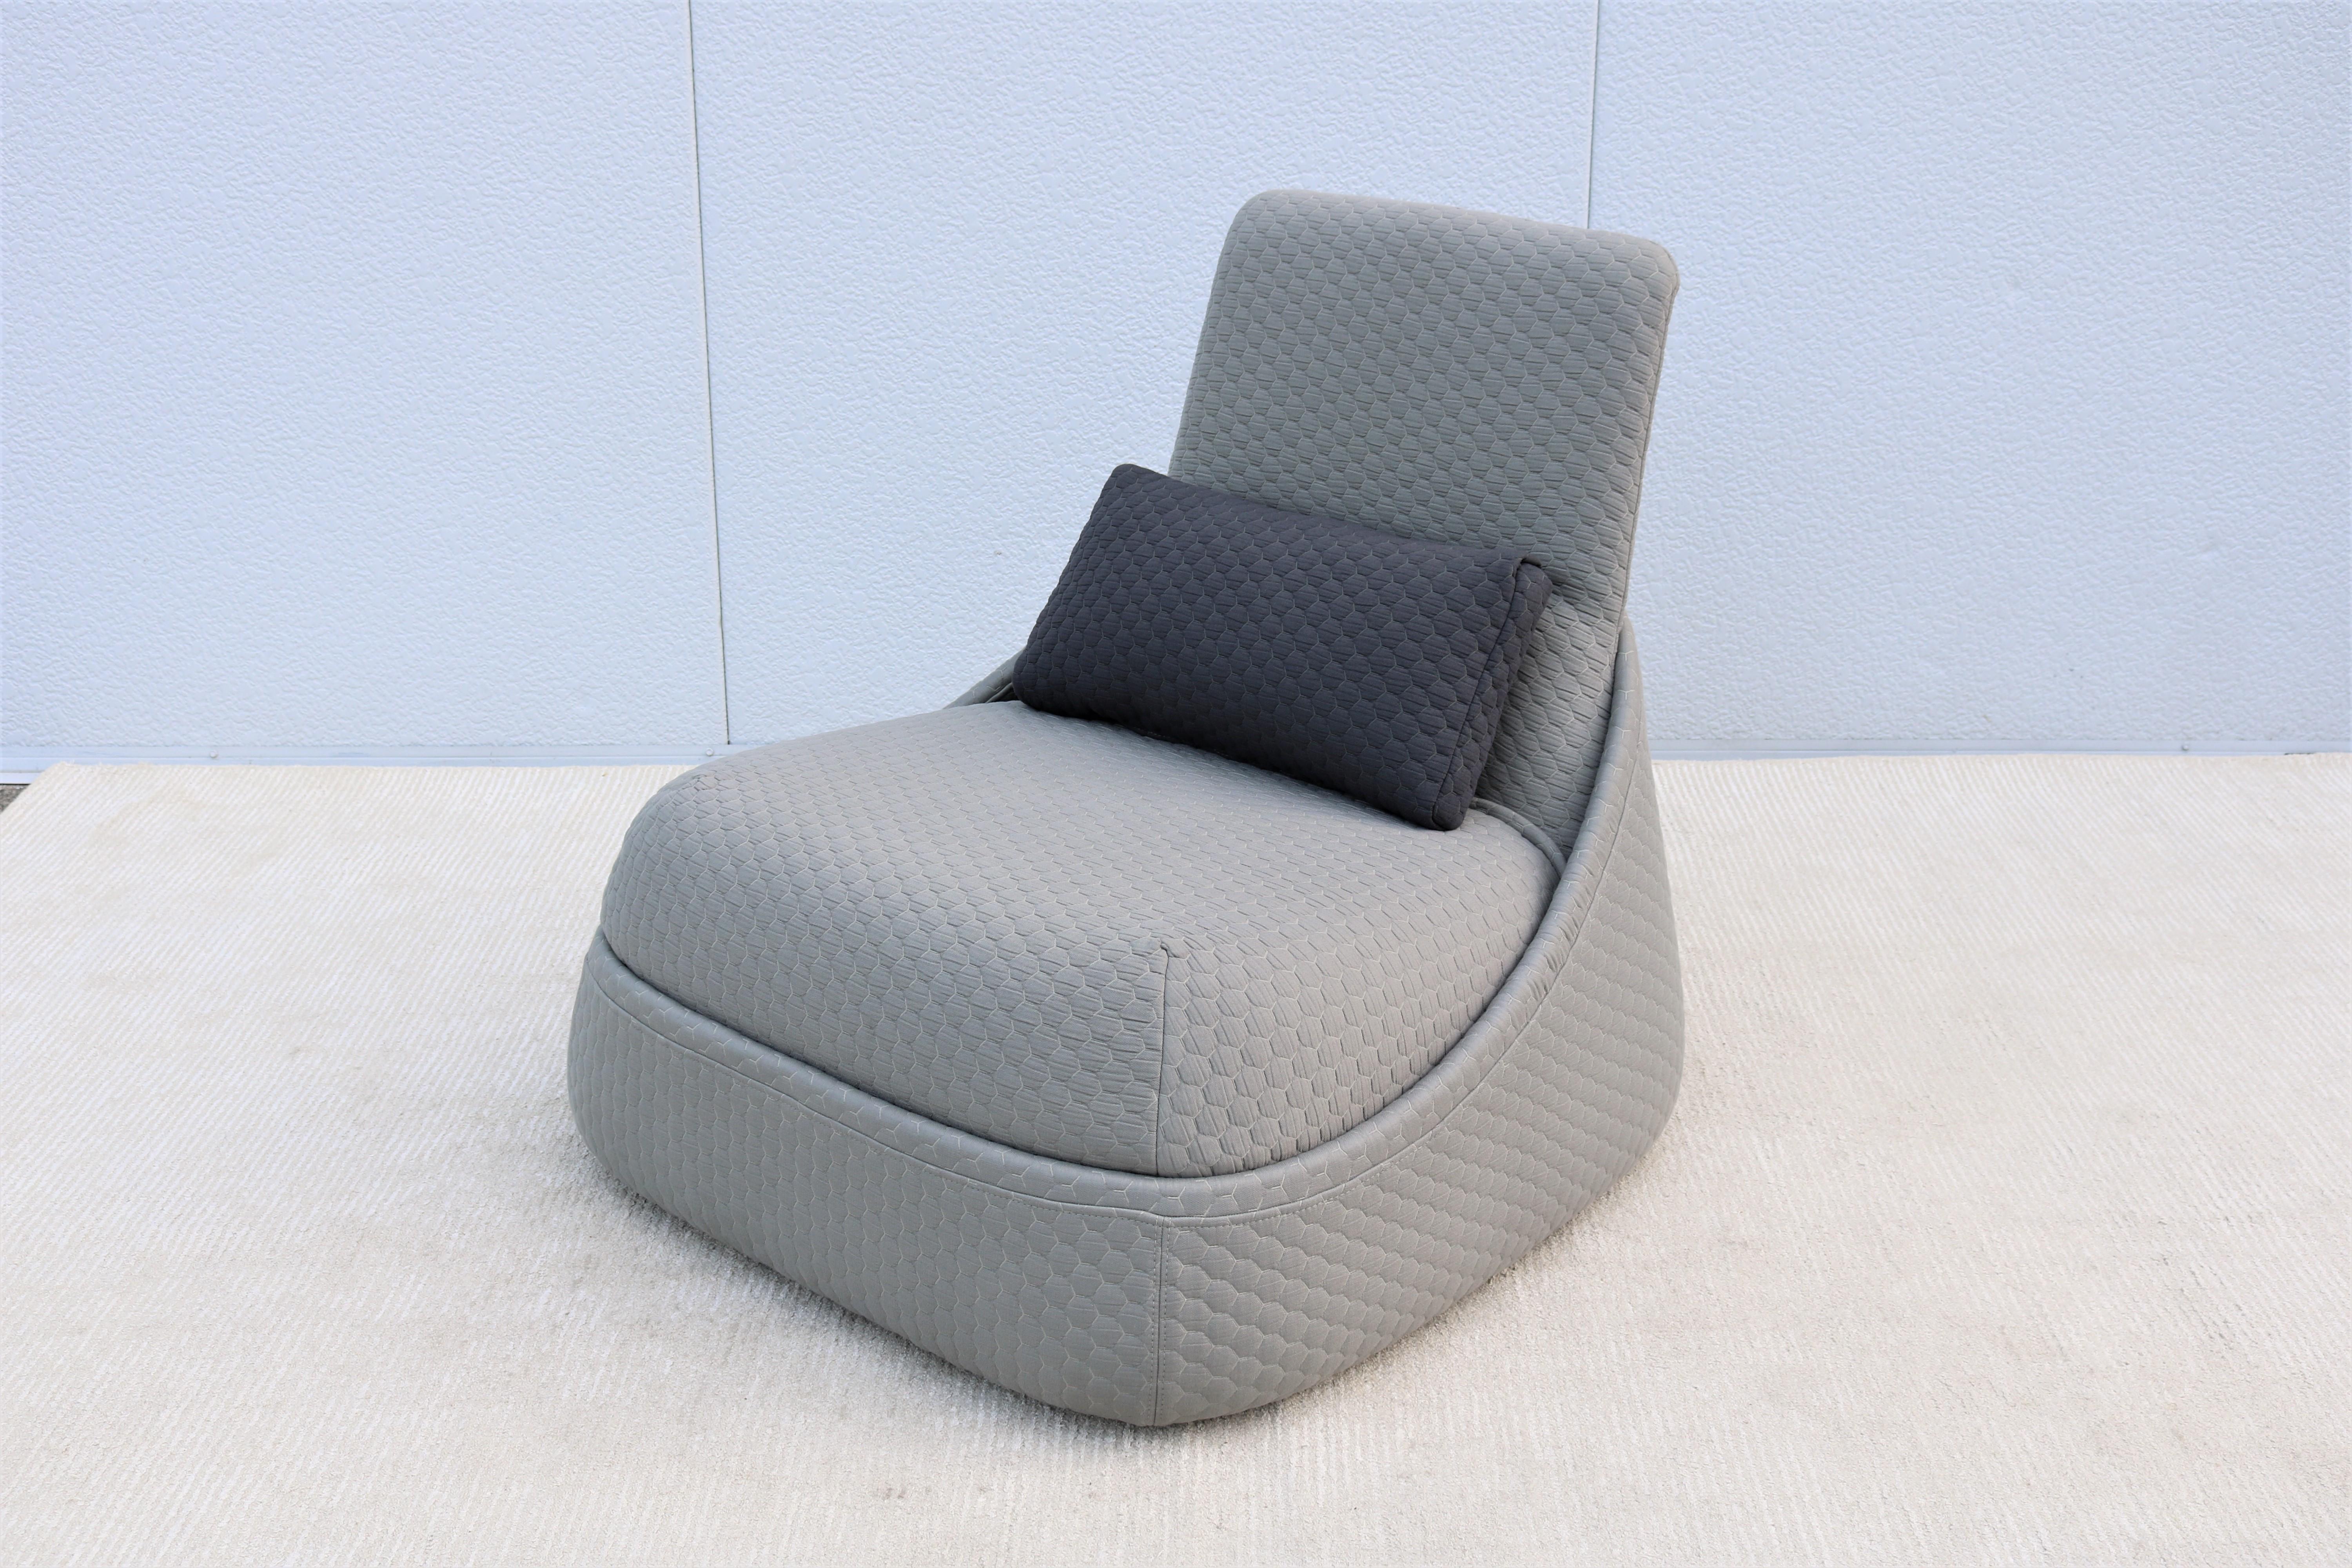 Fabulous Hosu convertible chaise lounge chair with ottoman and lumbar pillow by Coalesse.
Hosu is a habitat to relax, work, think and read, it encourages spreading out in comfort.
This unique lounge creates a very comforting personal space to